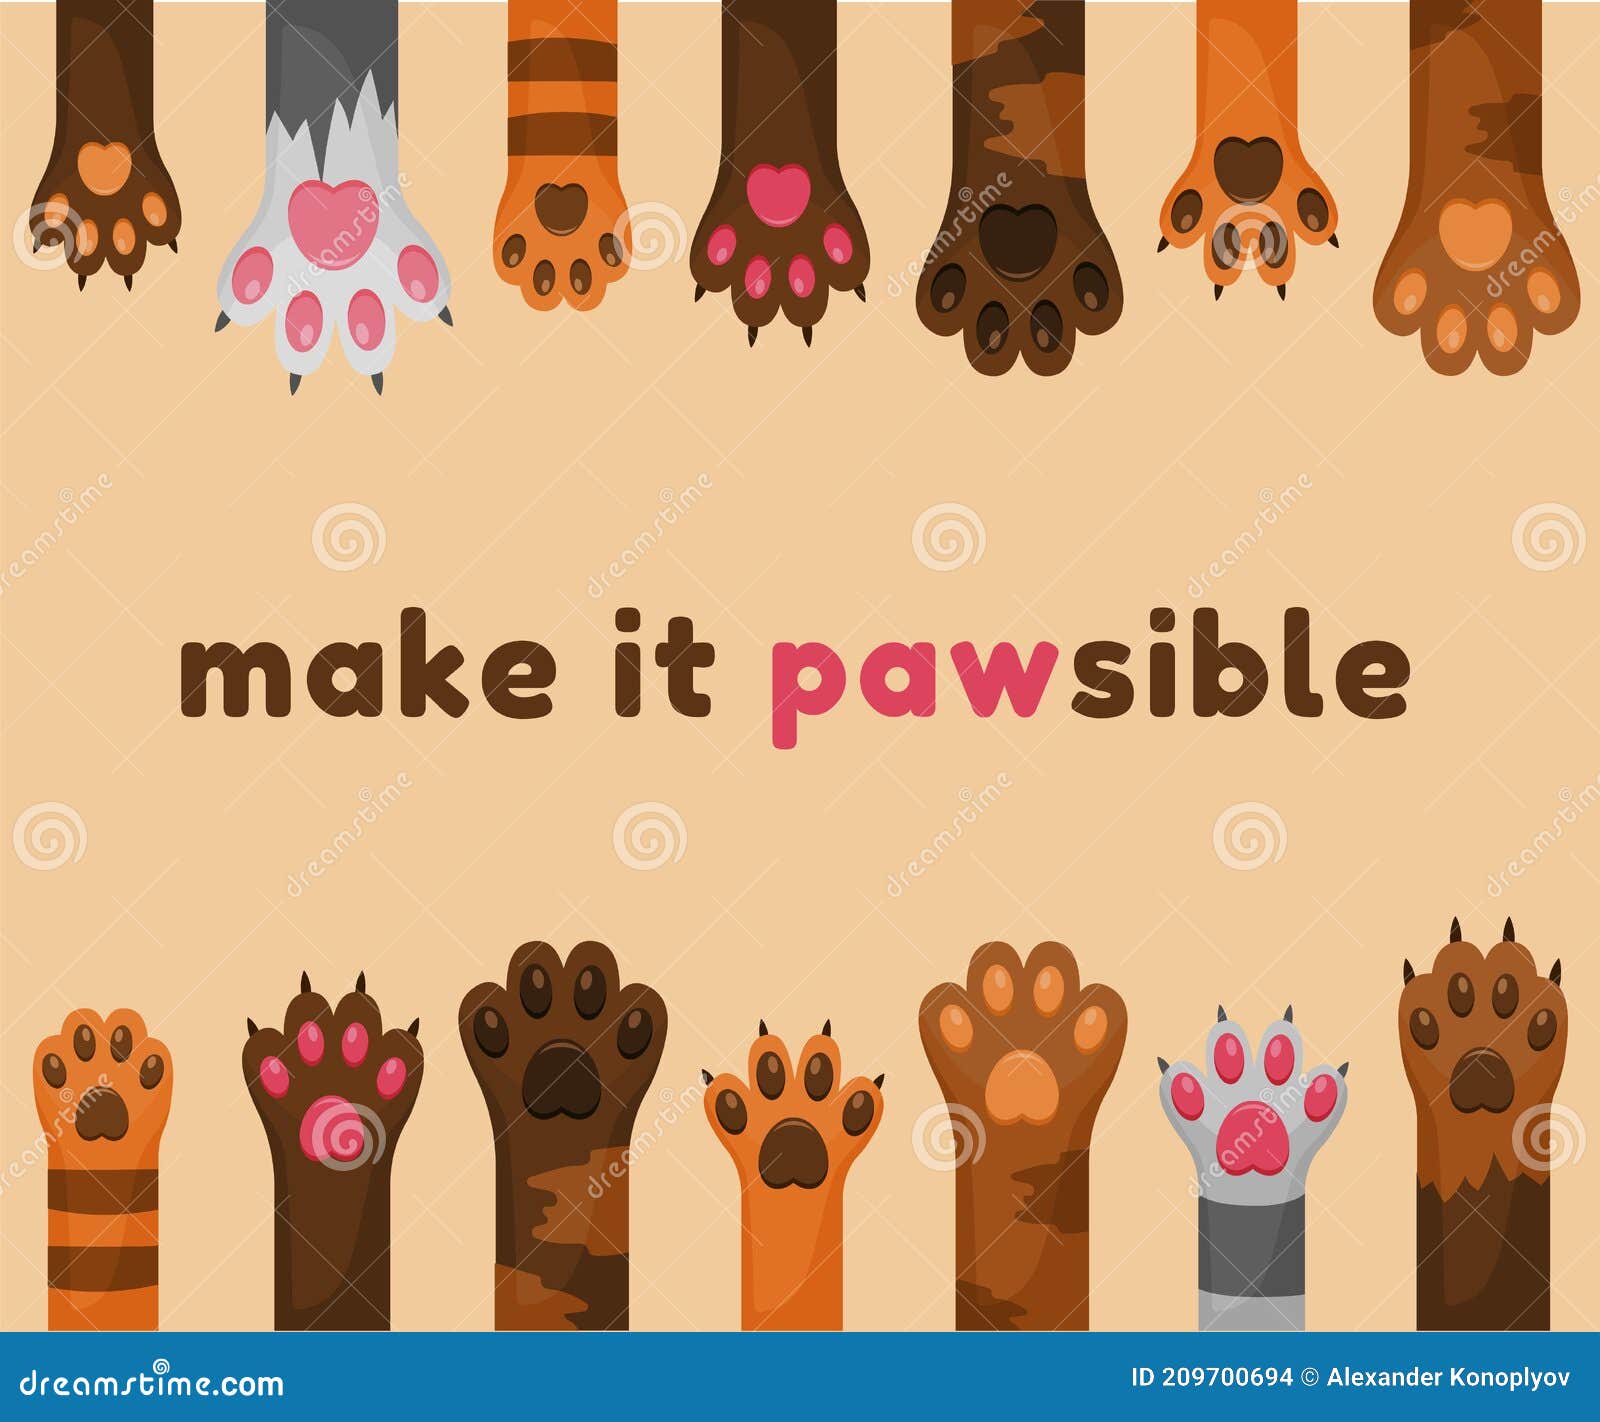 cats and dogs paws cartoon background. animals feet with claws and pads. adopting pet.